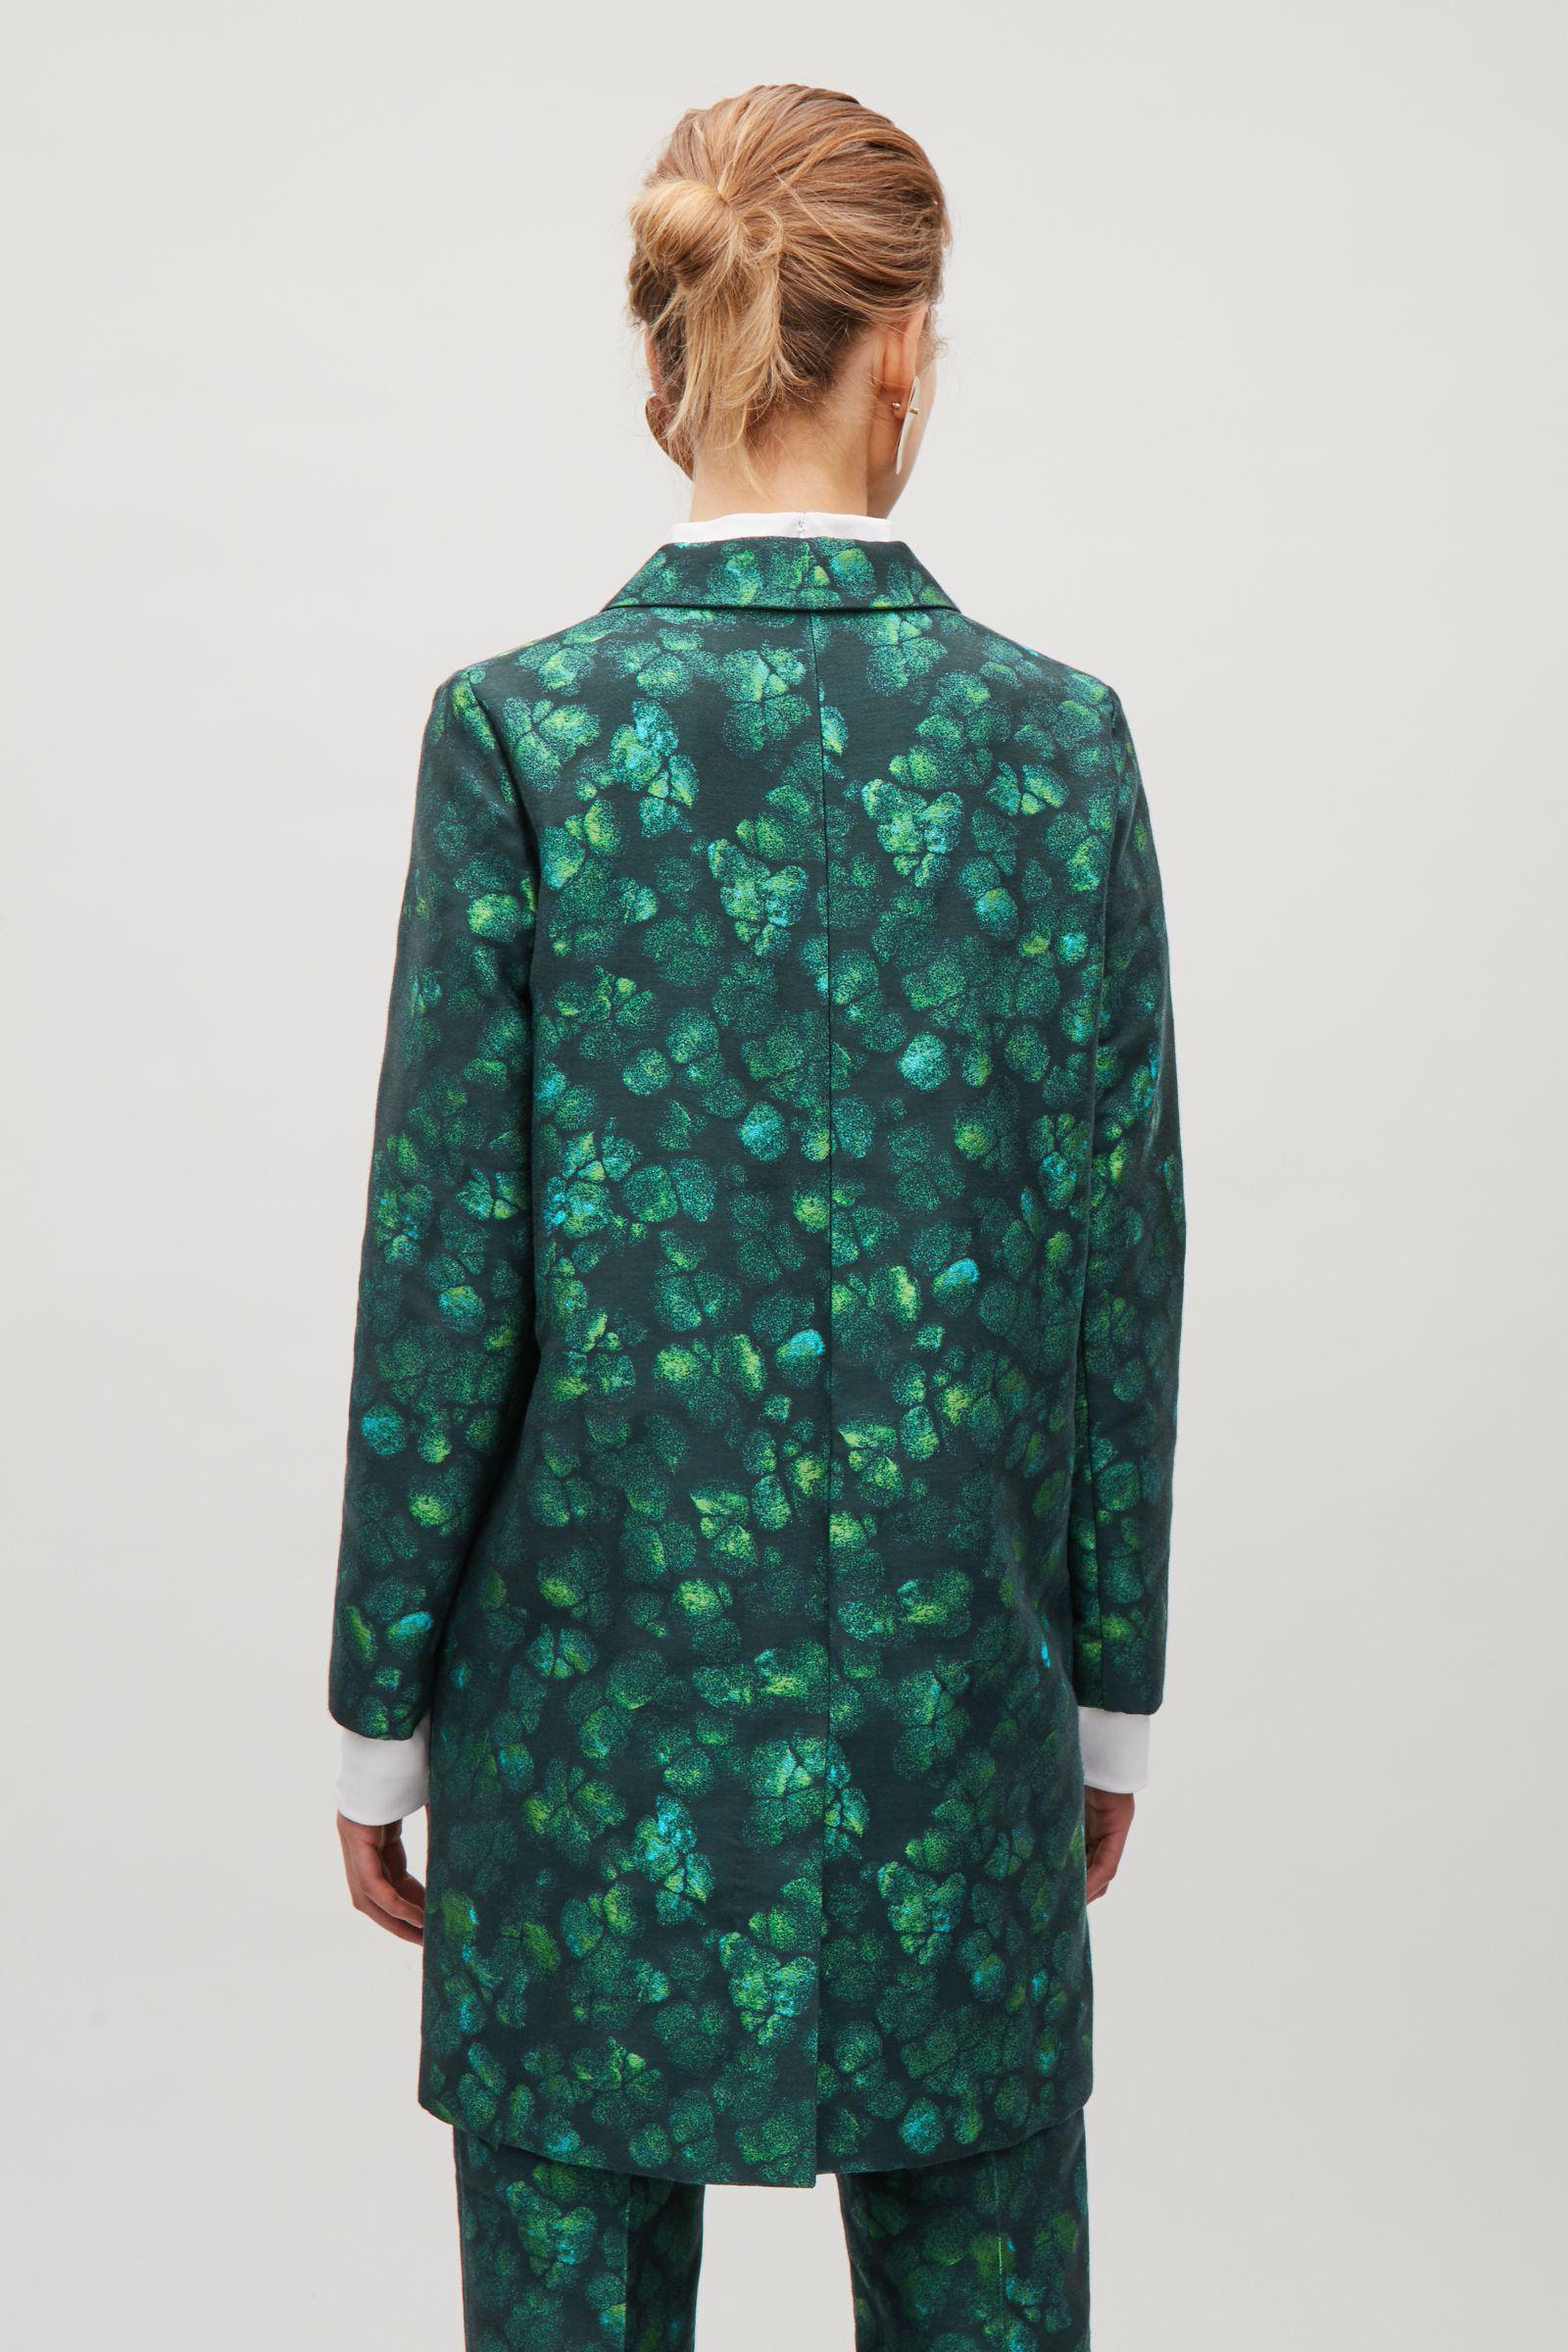 COS Tailored Jacquard Coat in Green | Lyst